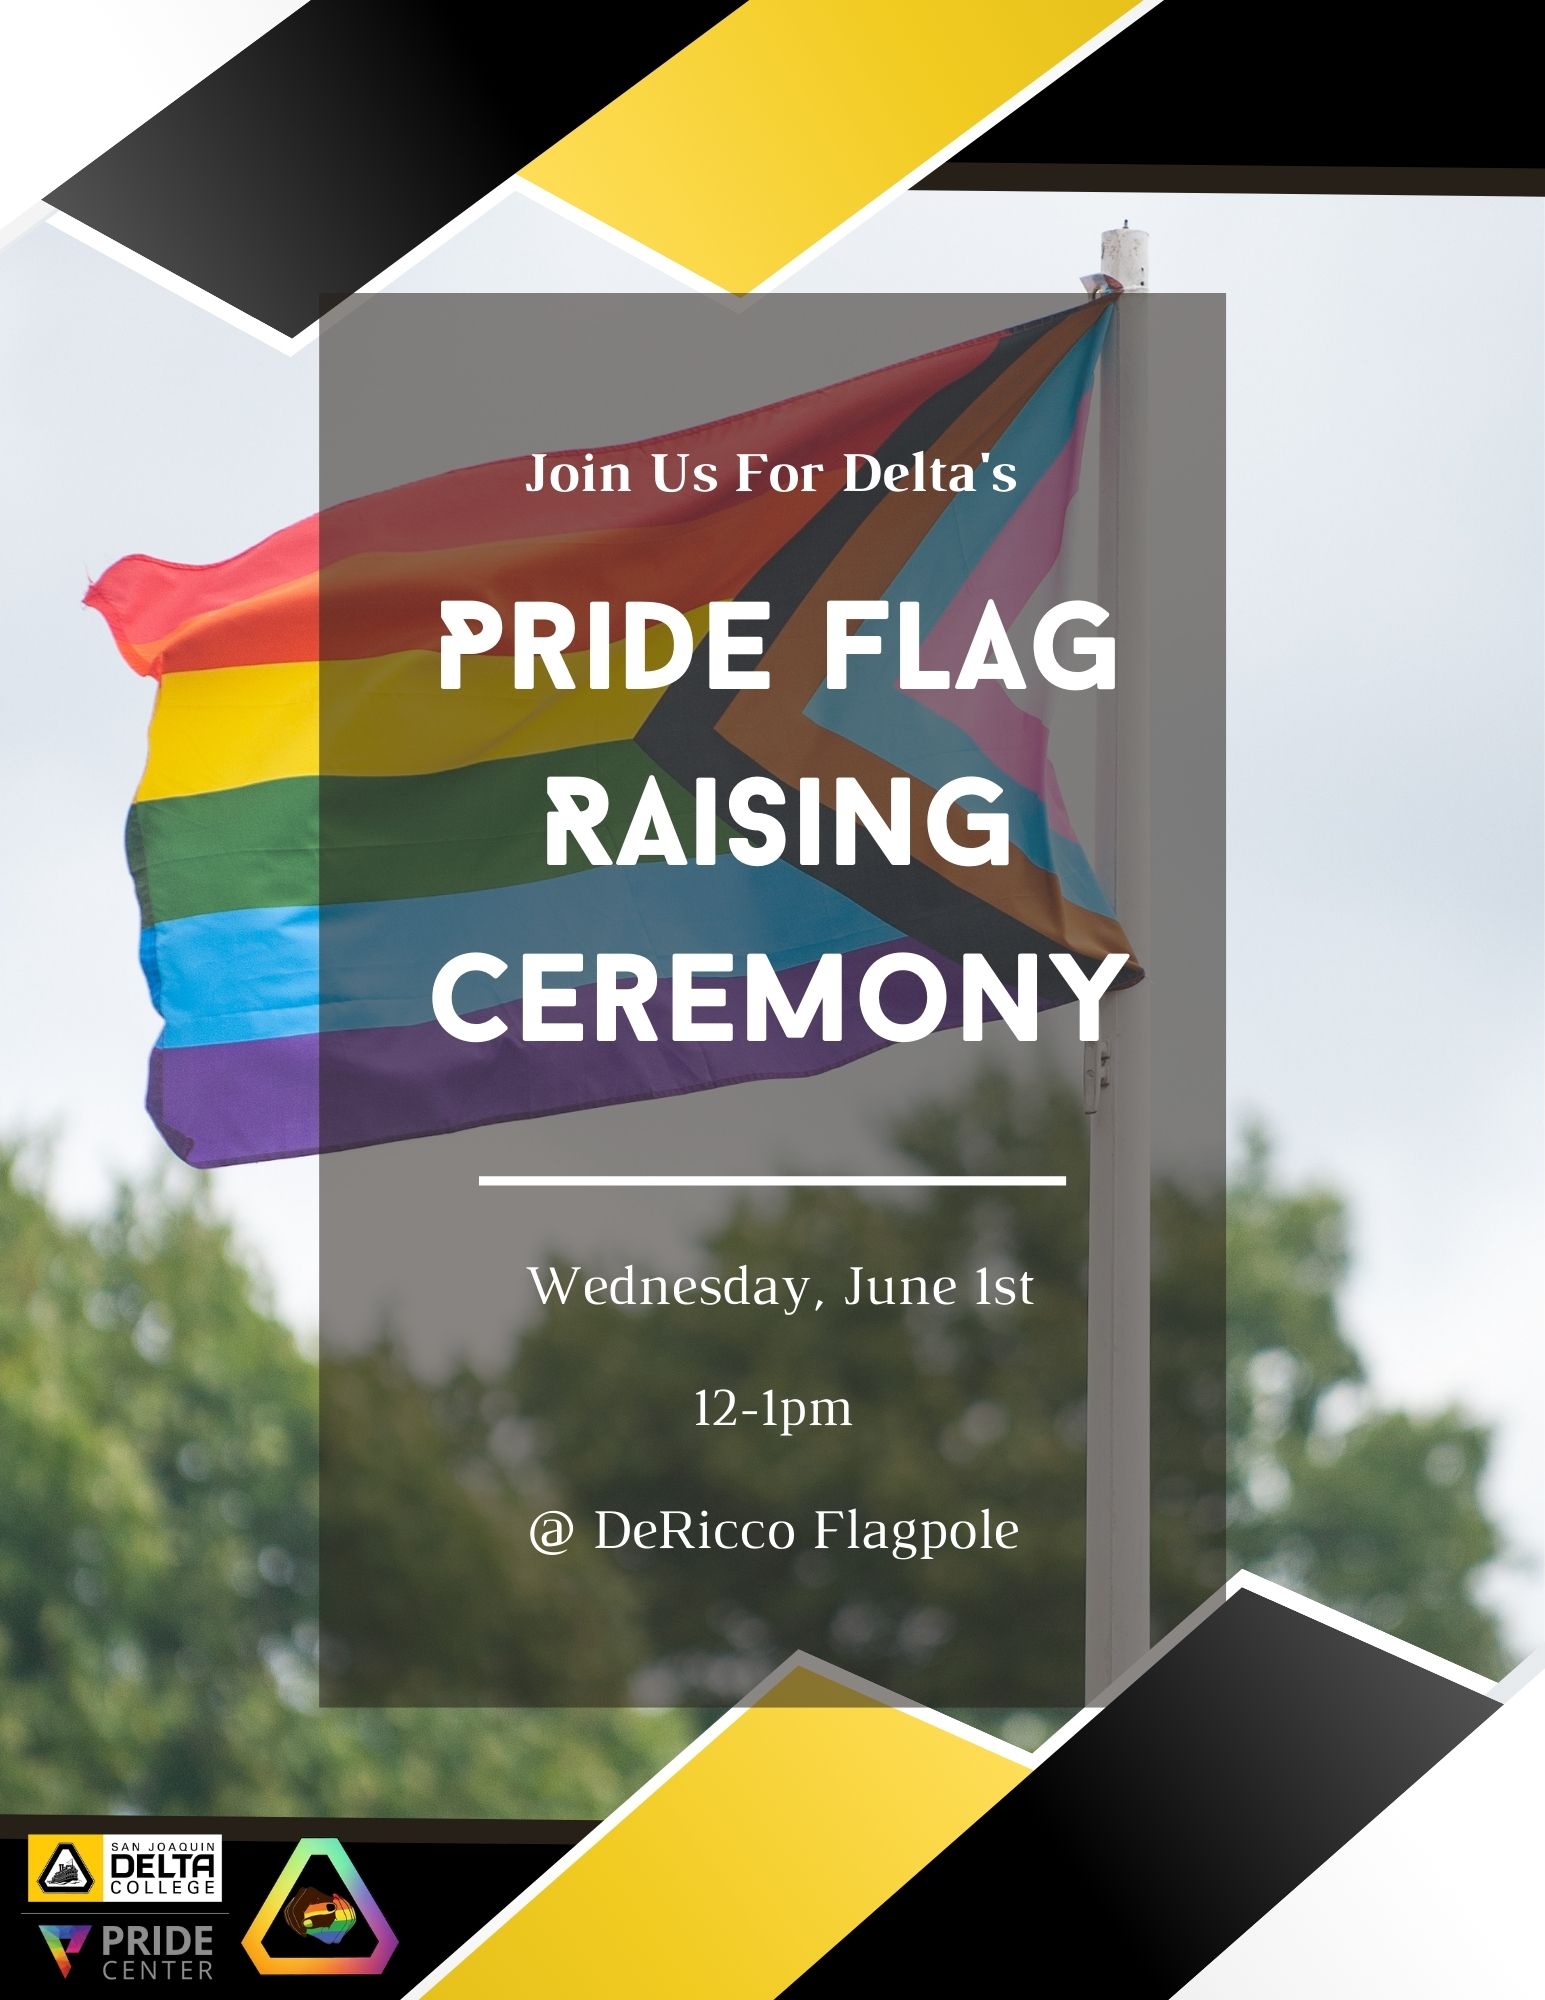 Progress Pride flag raising is scheduled for 12 p.m. Wednesday, June 1 at the DeRicco Building